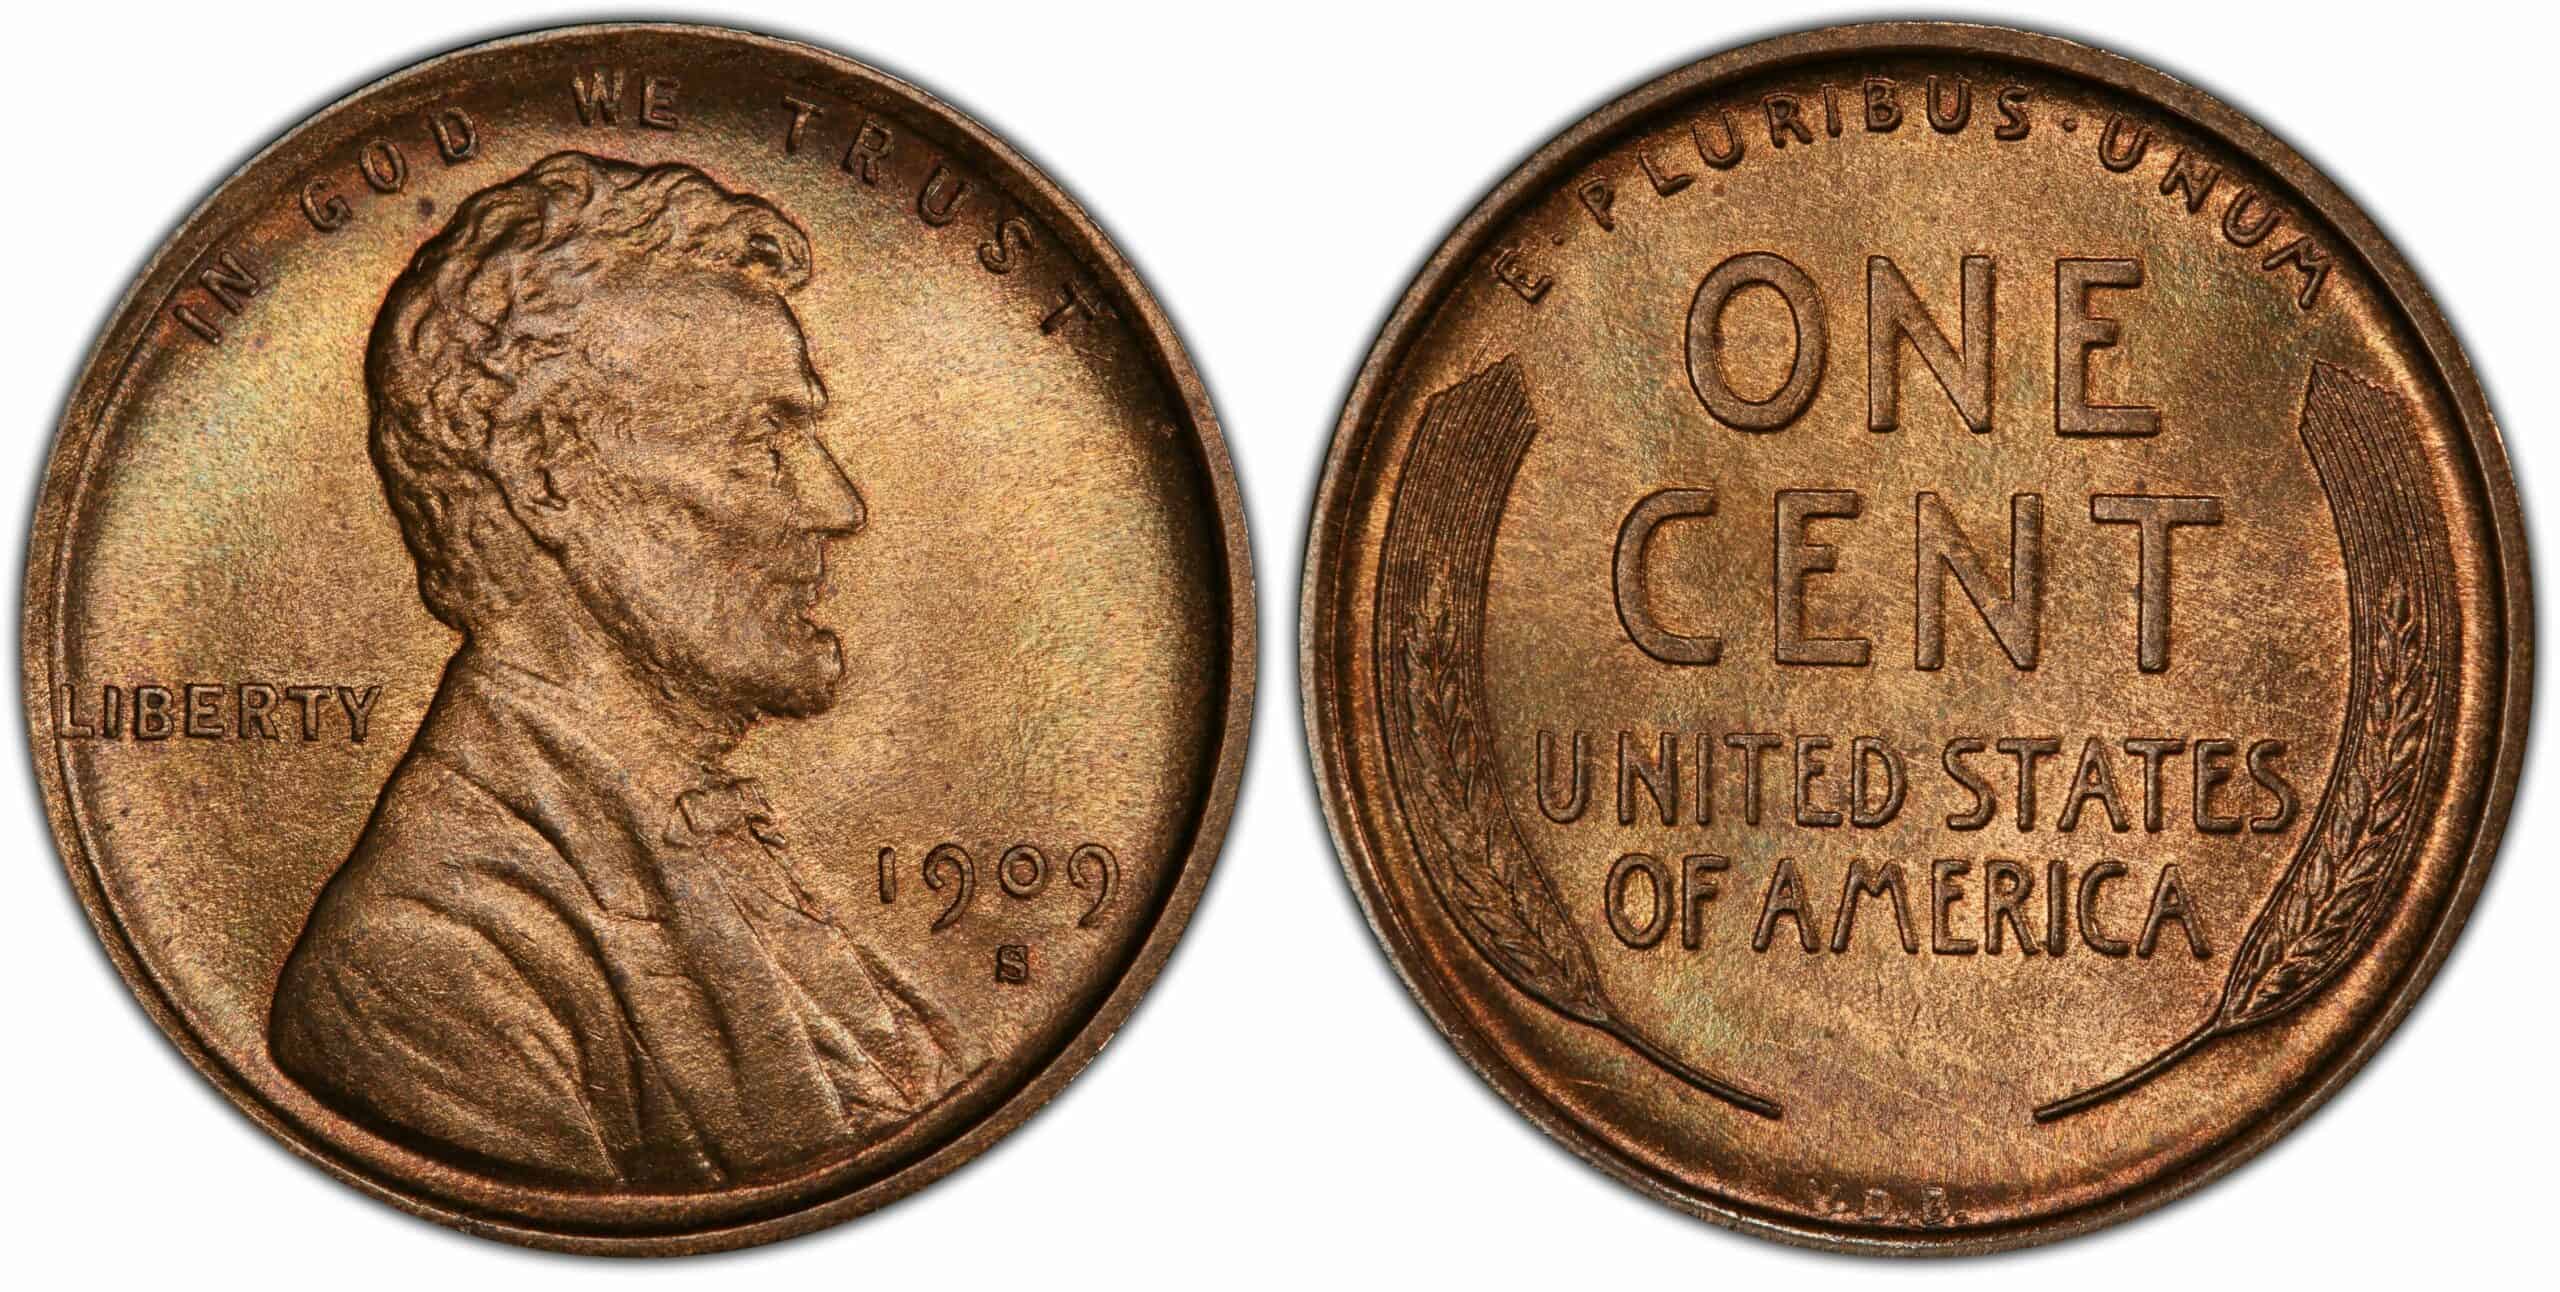 1909 S-VDB Lincoln Wheat Penny